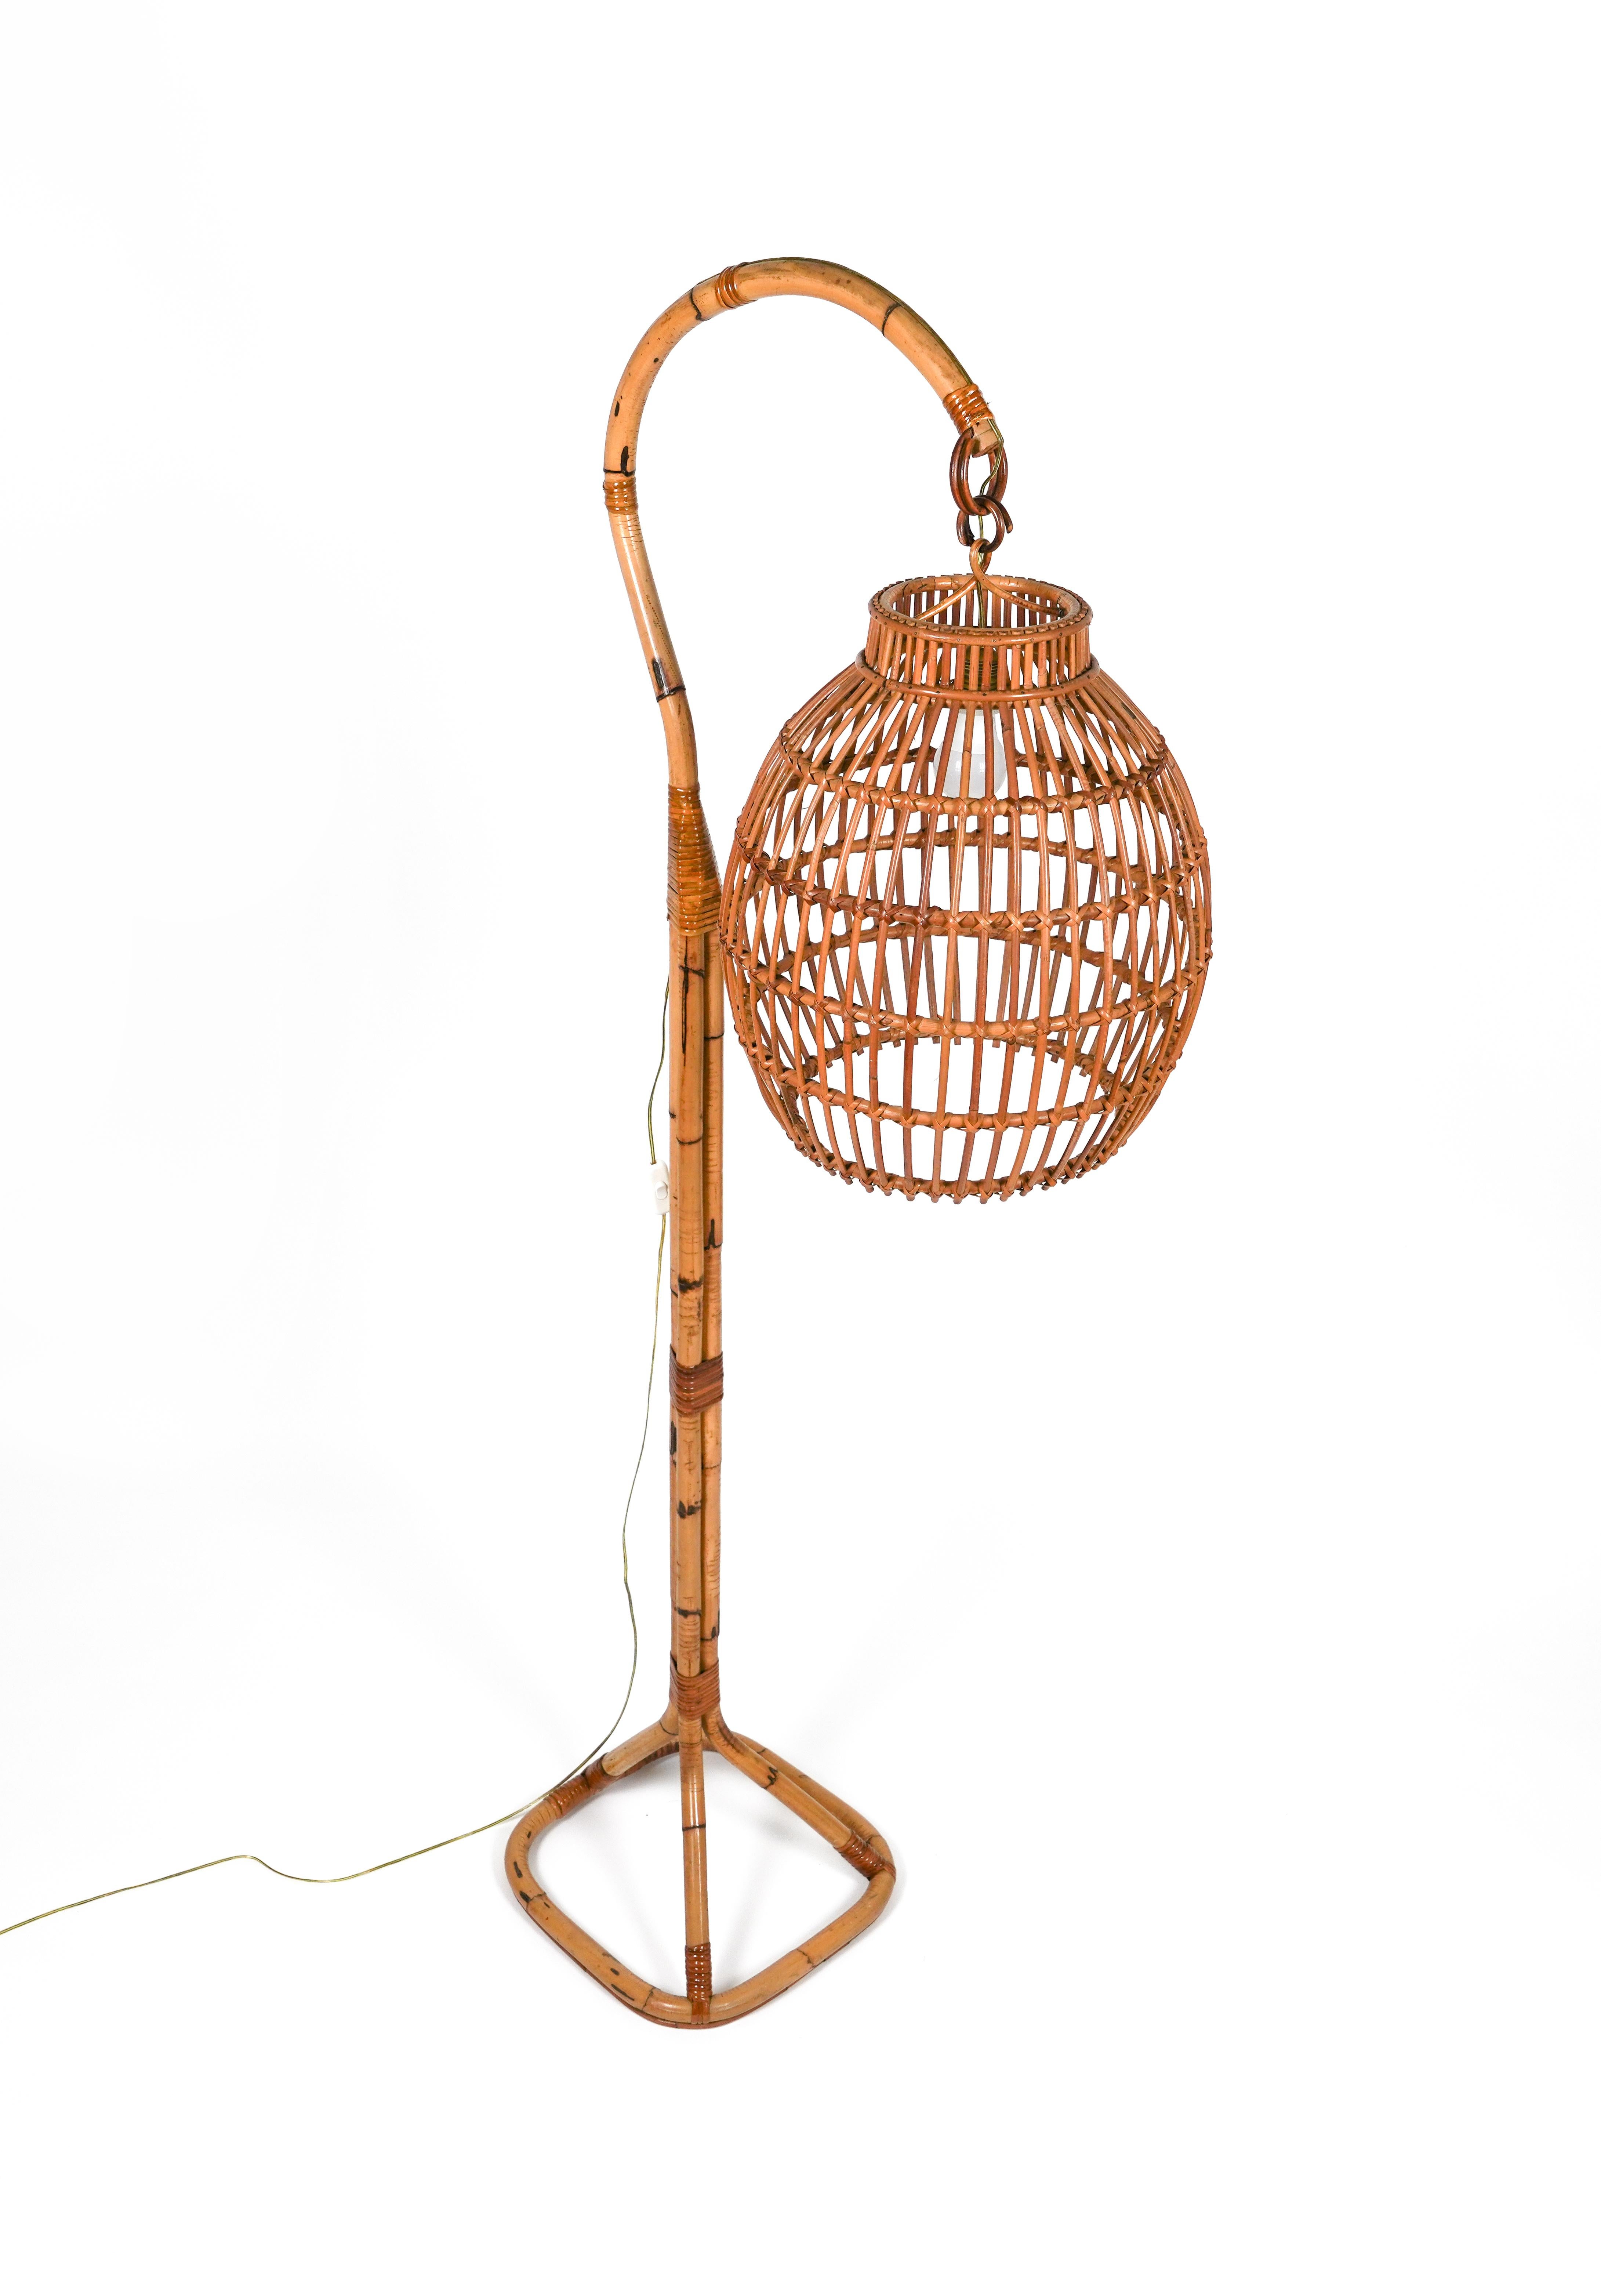 Mid-20th Century Midcentury Rattan and Bamboo Floor Lamp Louis Sognot Style, Italy 1960s For Sale